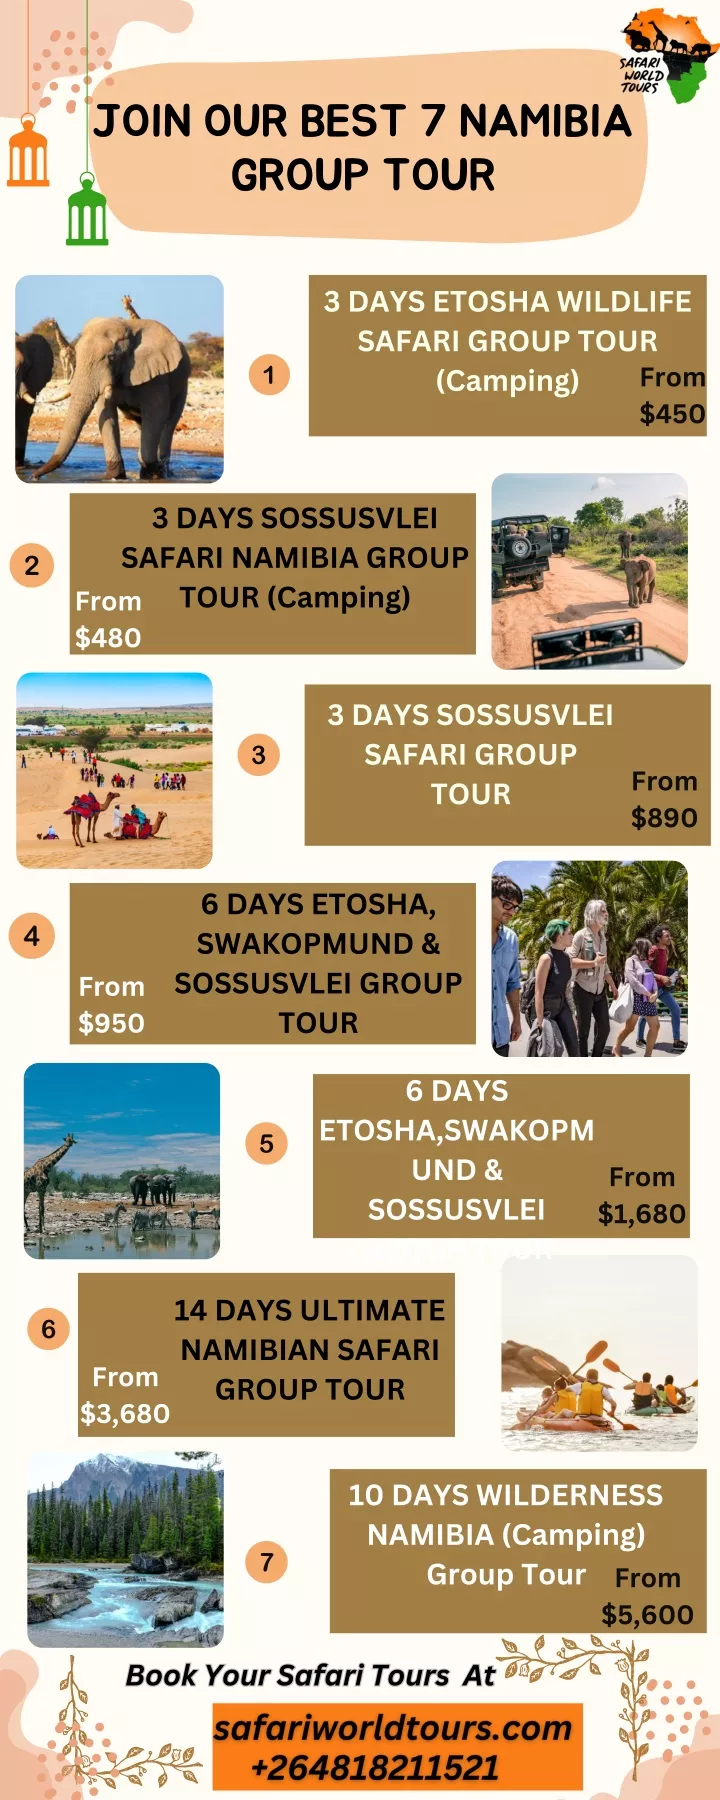 join our best 7 namibia group tour